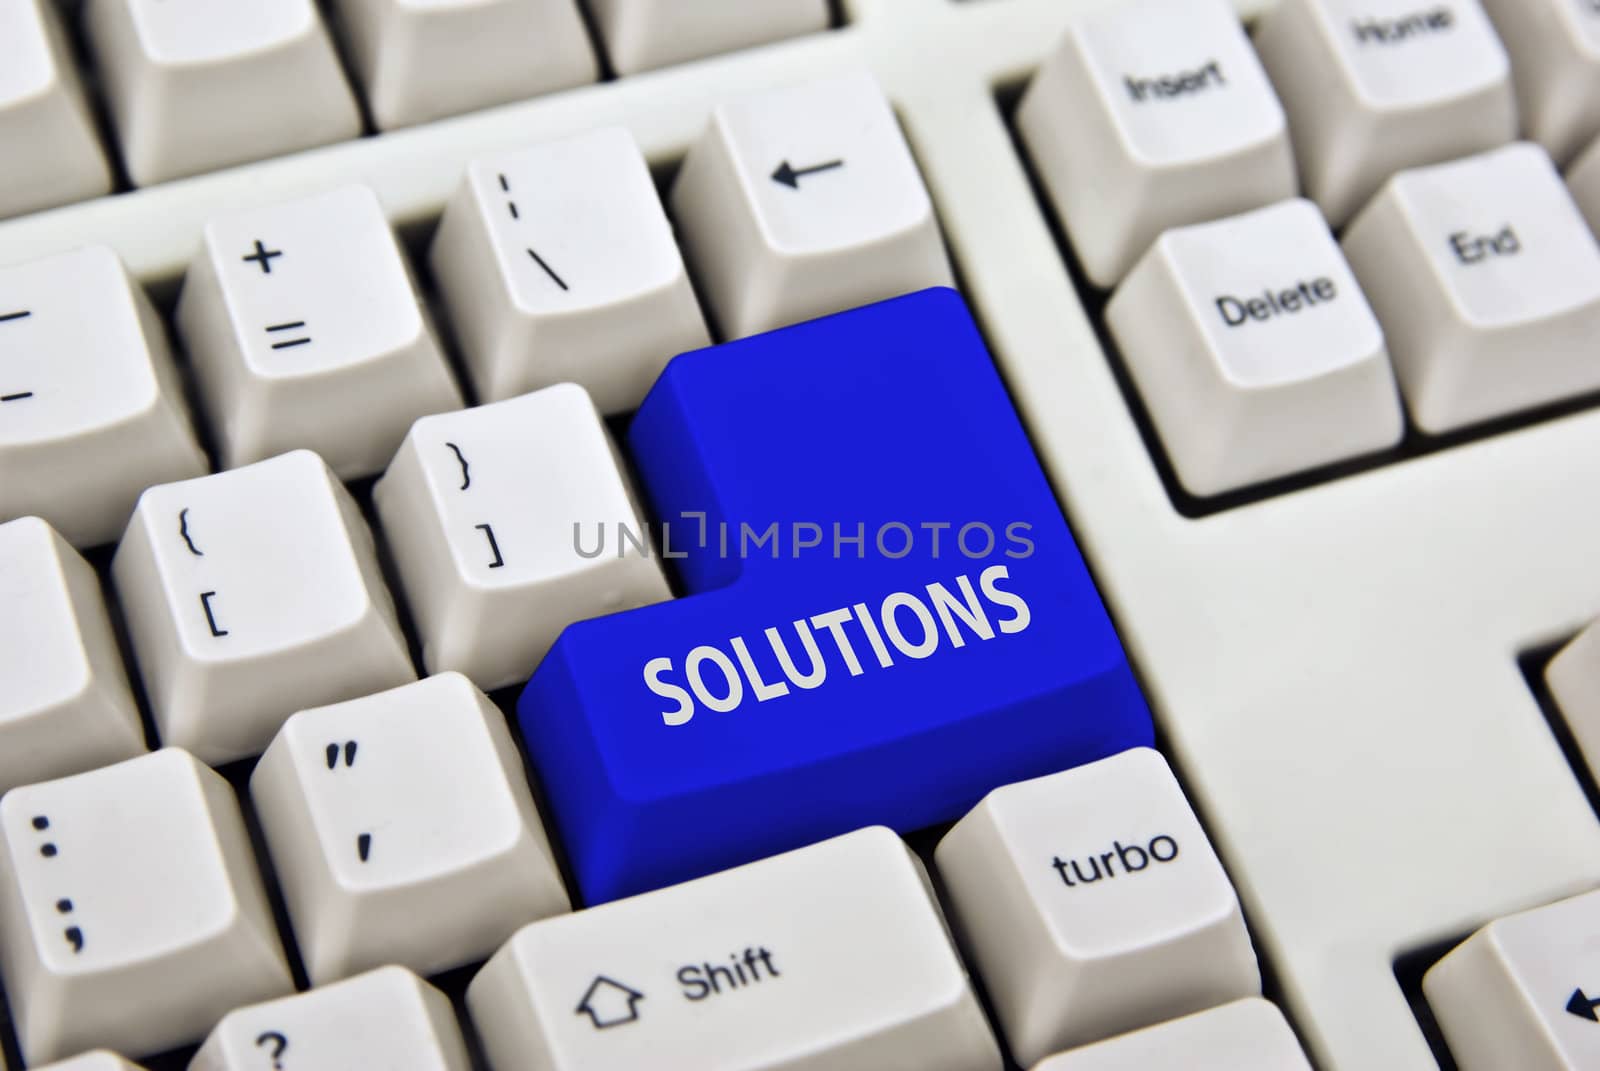 turn key solutions are easy with this key